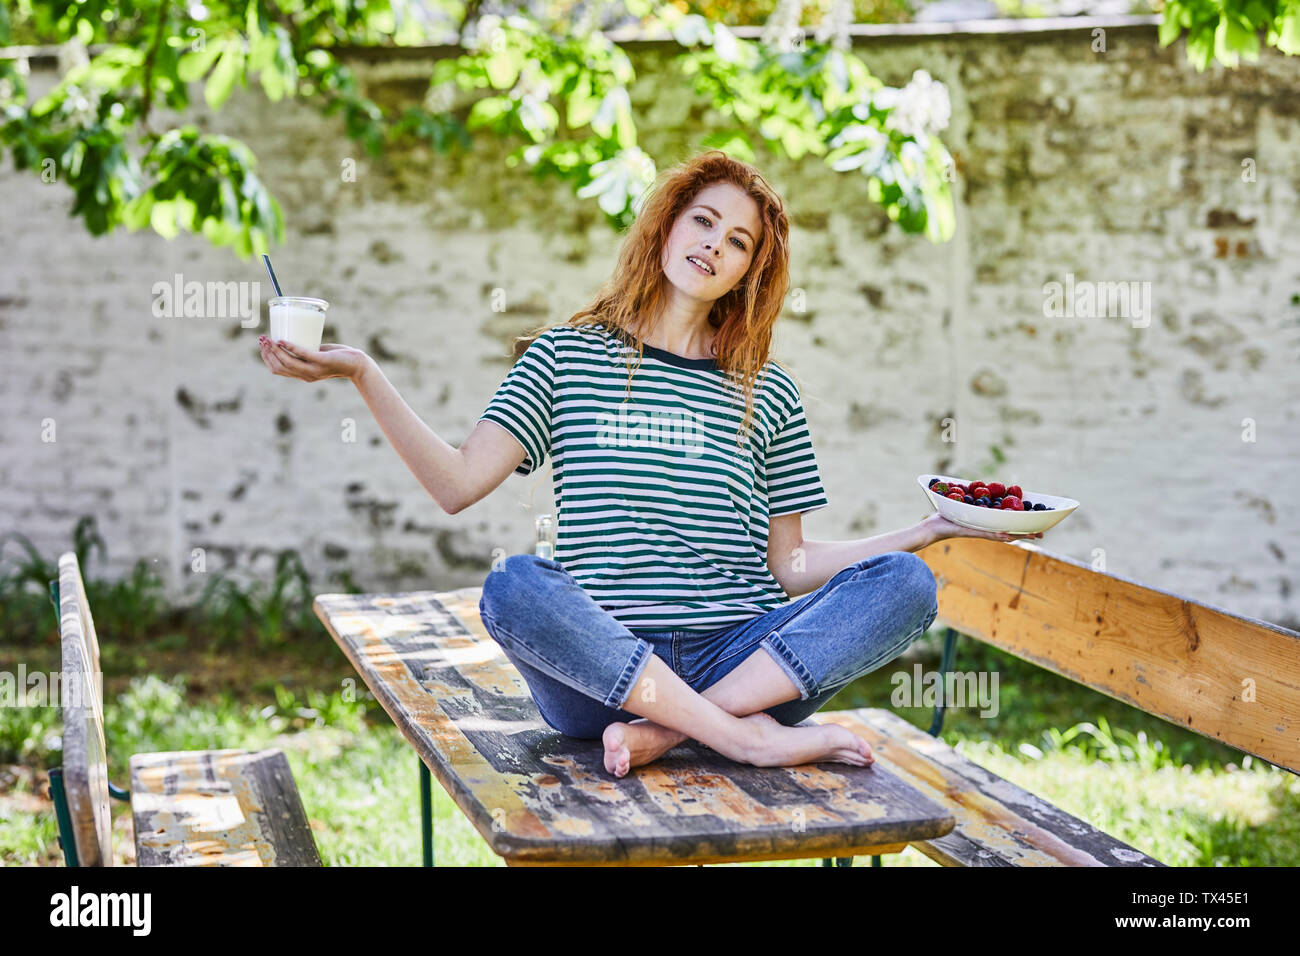 Portrait of young woman sitting on wooden table in garden holding bowl of berries and glass of yoghurt Stock Photo